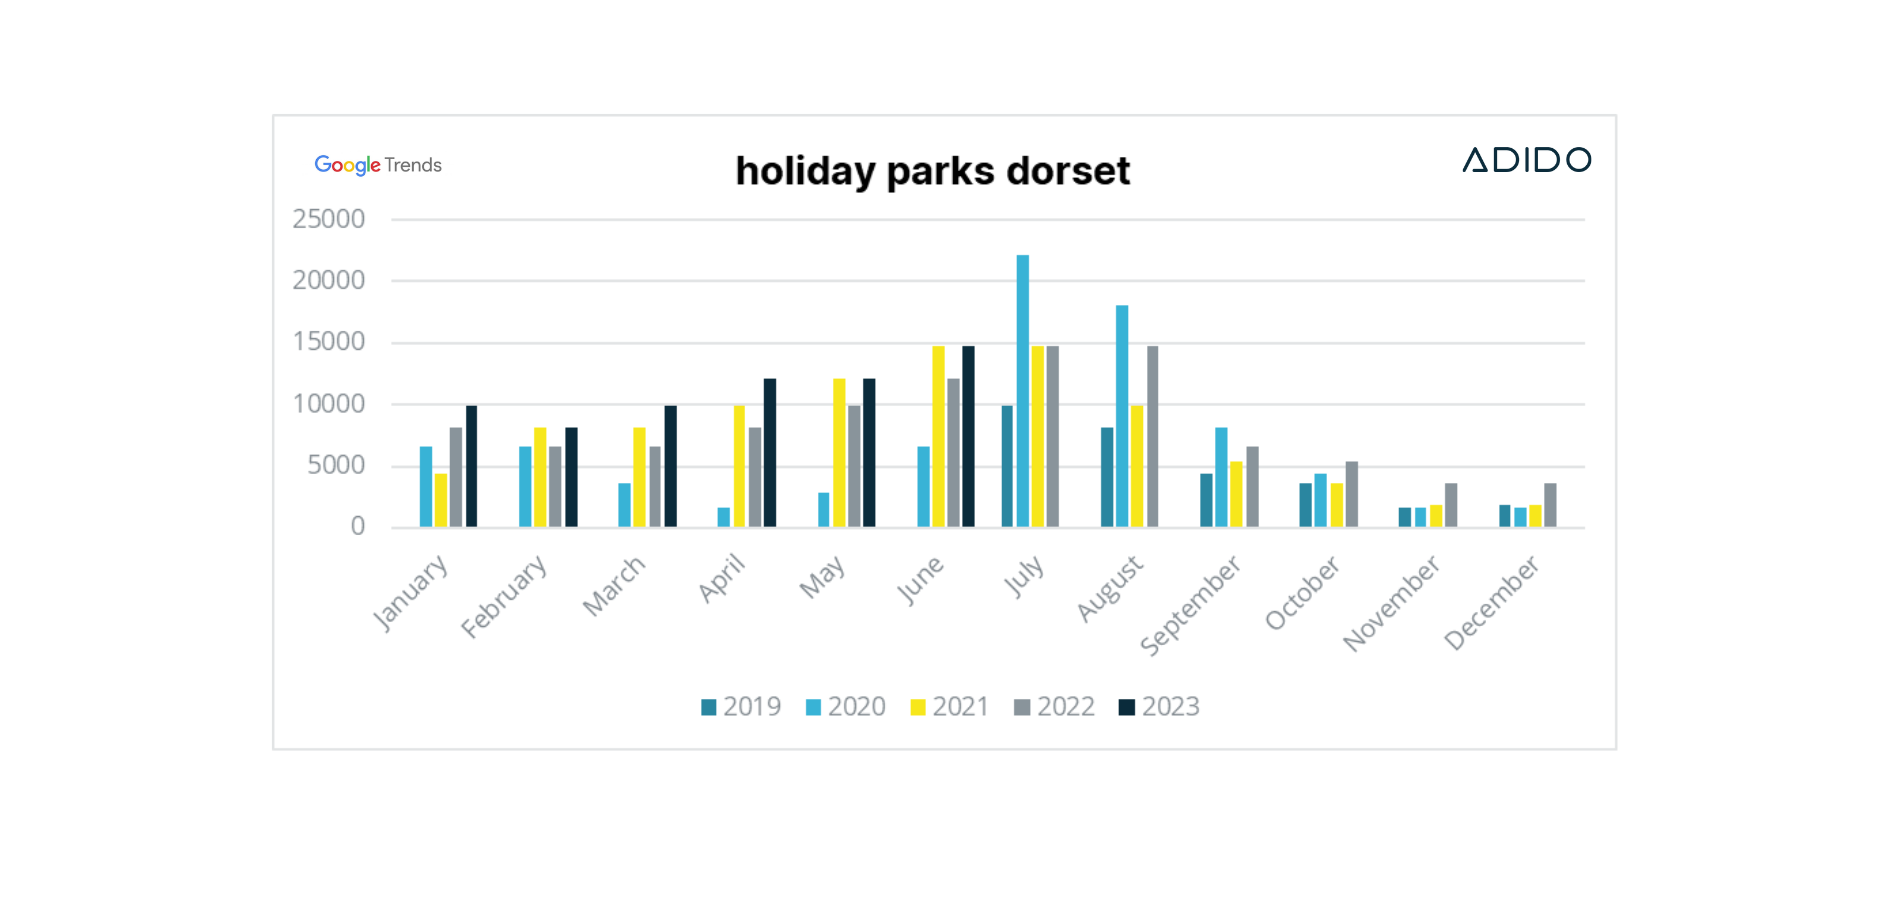 Holiday parks dorset search trend 2019 2023